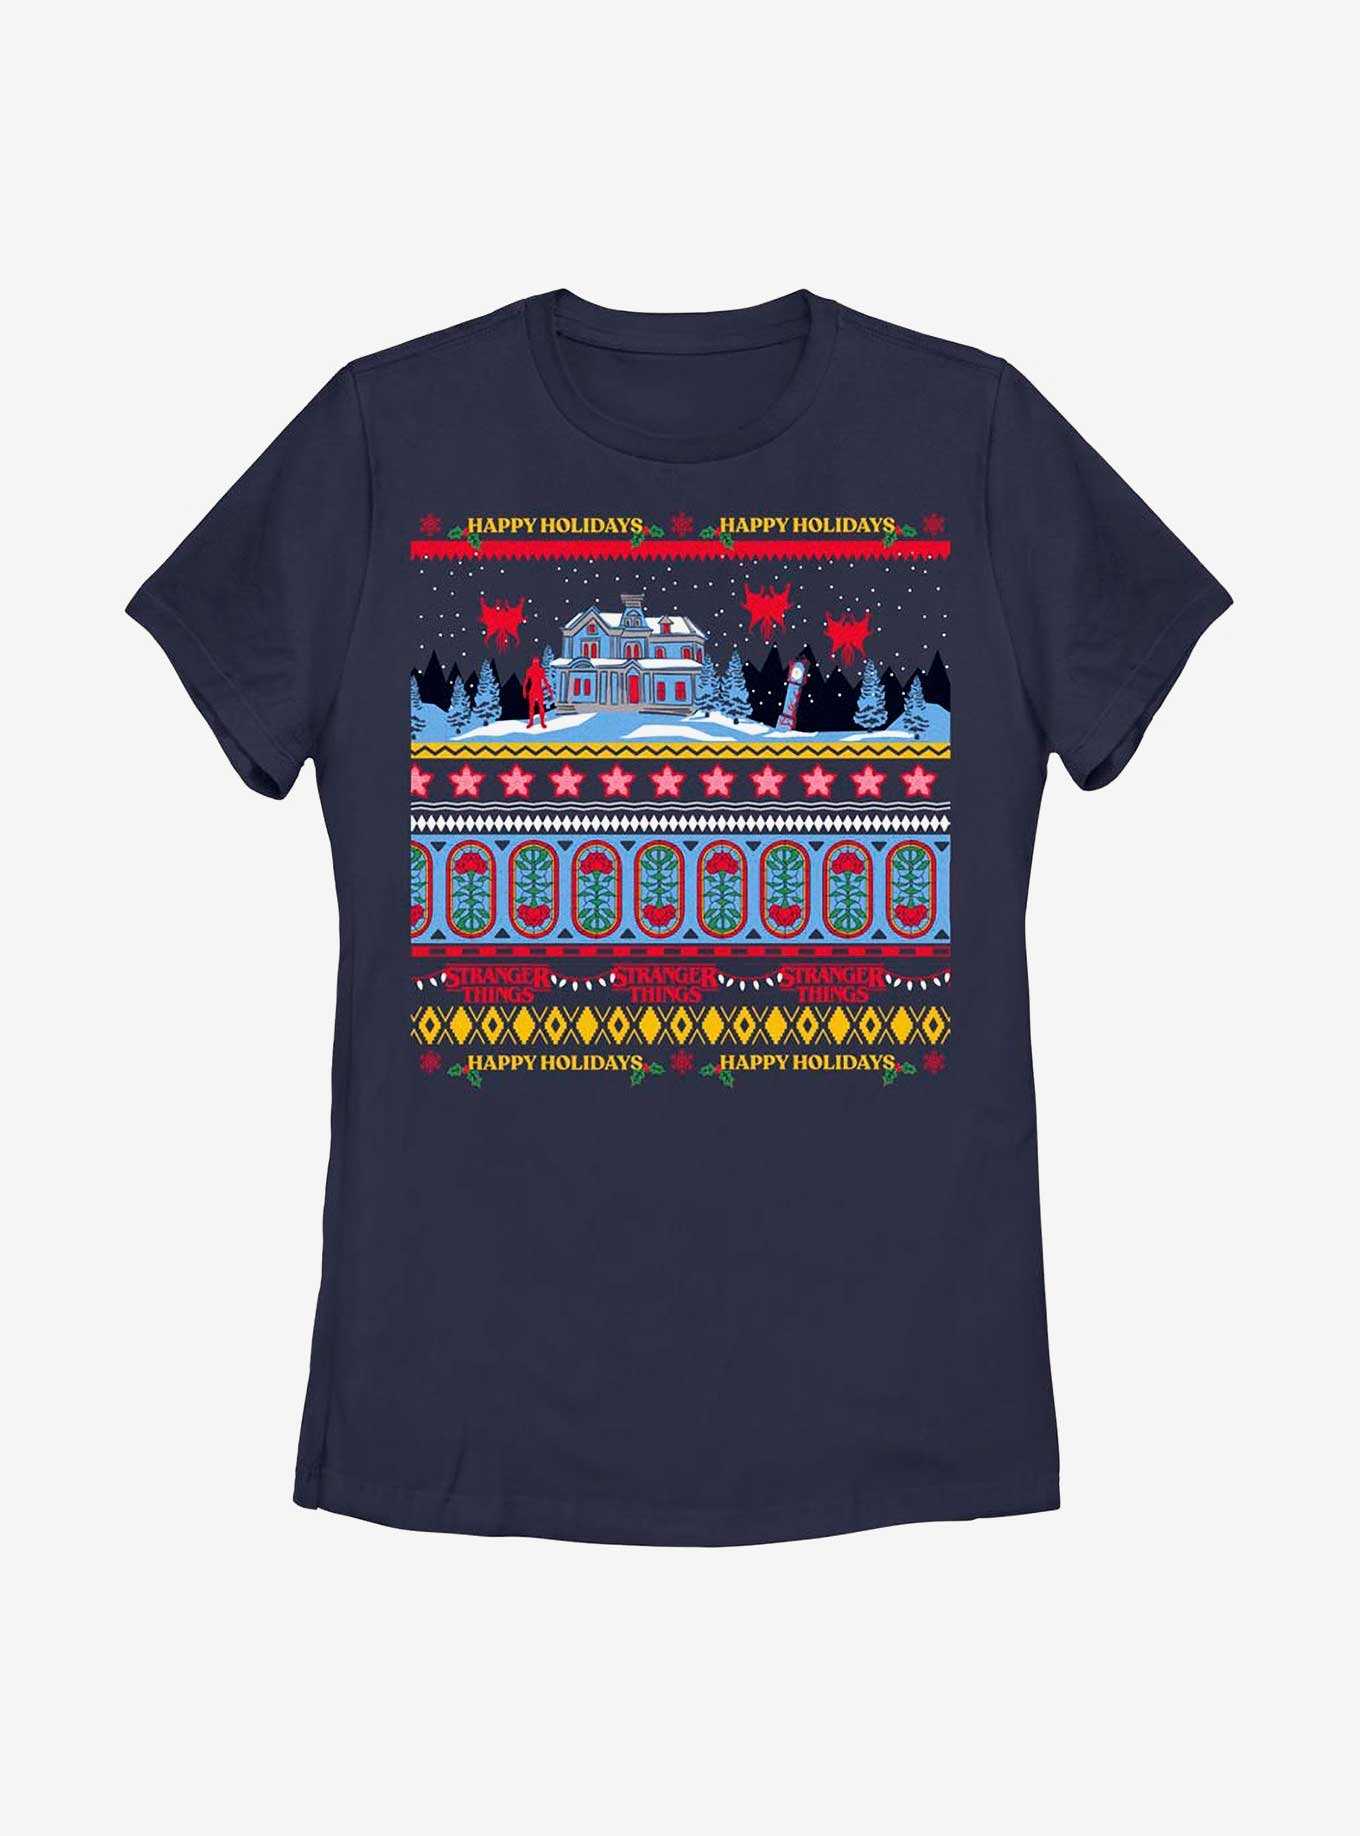 Stranger Things Creel House Ugly Sweater Womens T-Shirt, , hi-res